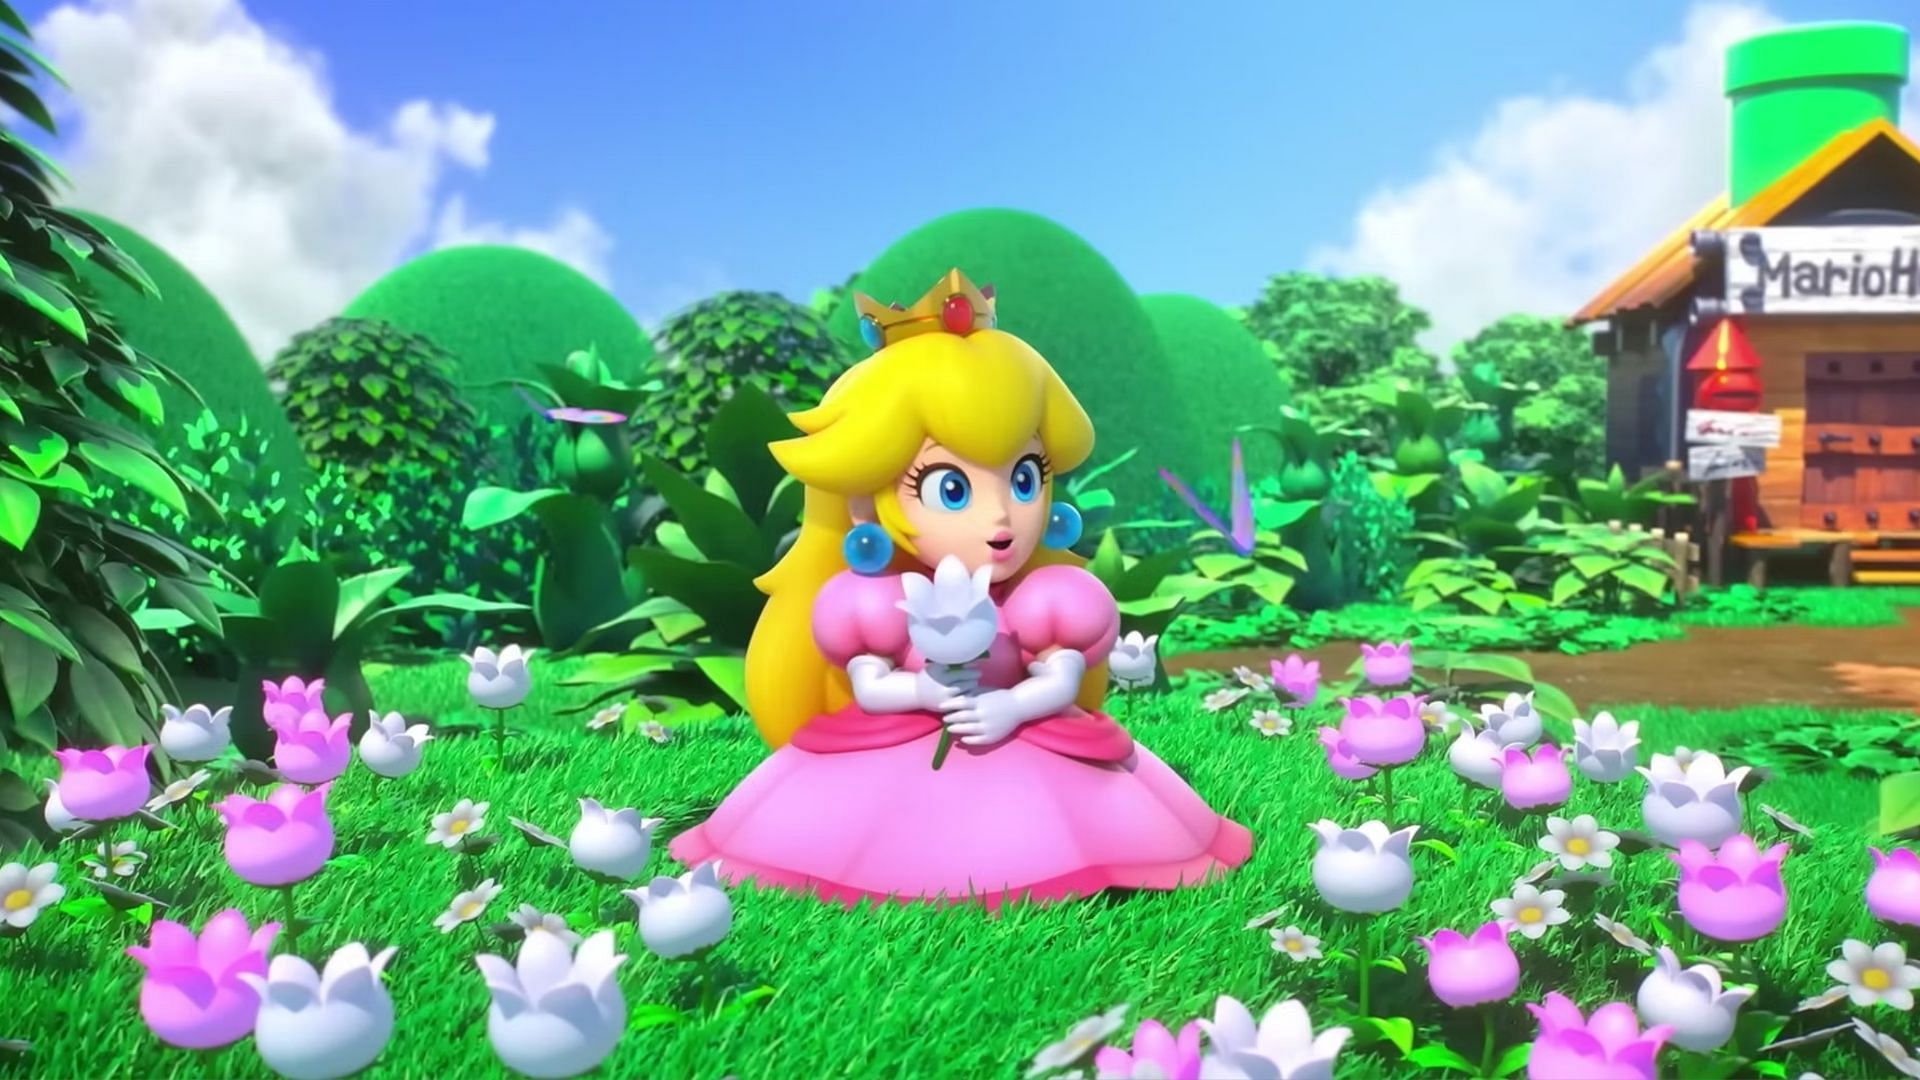 Princess Peach stands out as the best party member (Image via Nintendo)